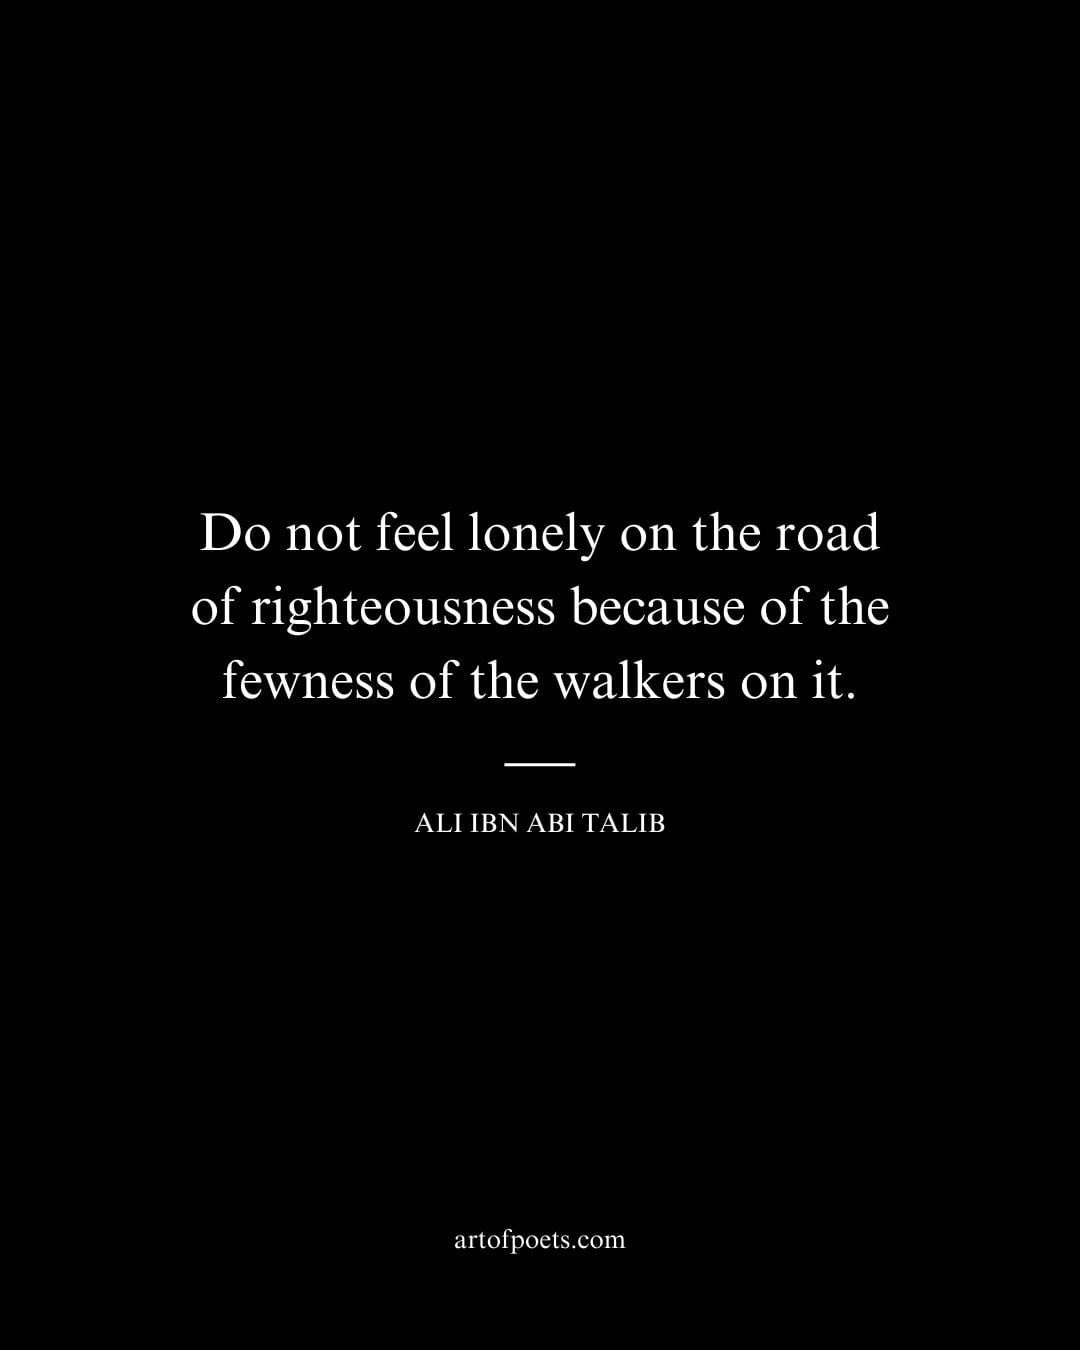 Do not feel lonely on the road of righteousness because of the fewness of the walkers on it